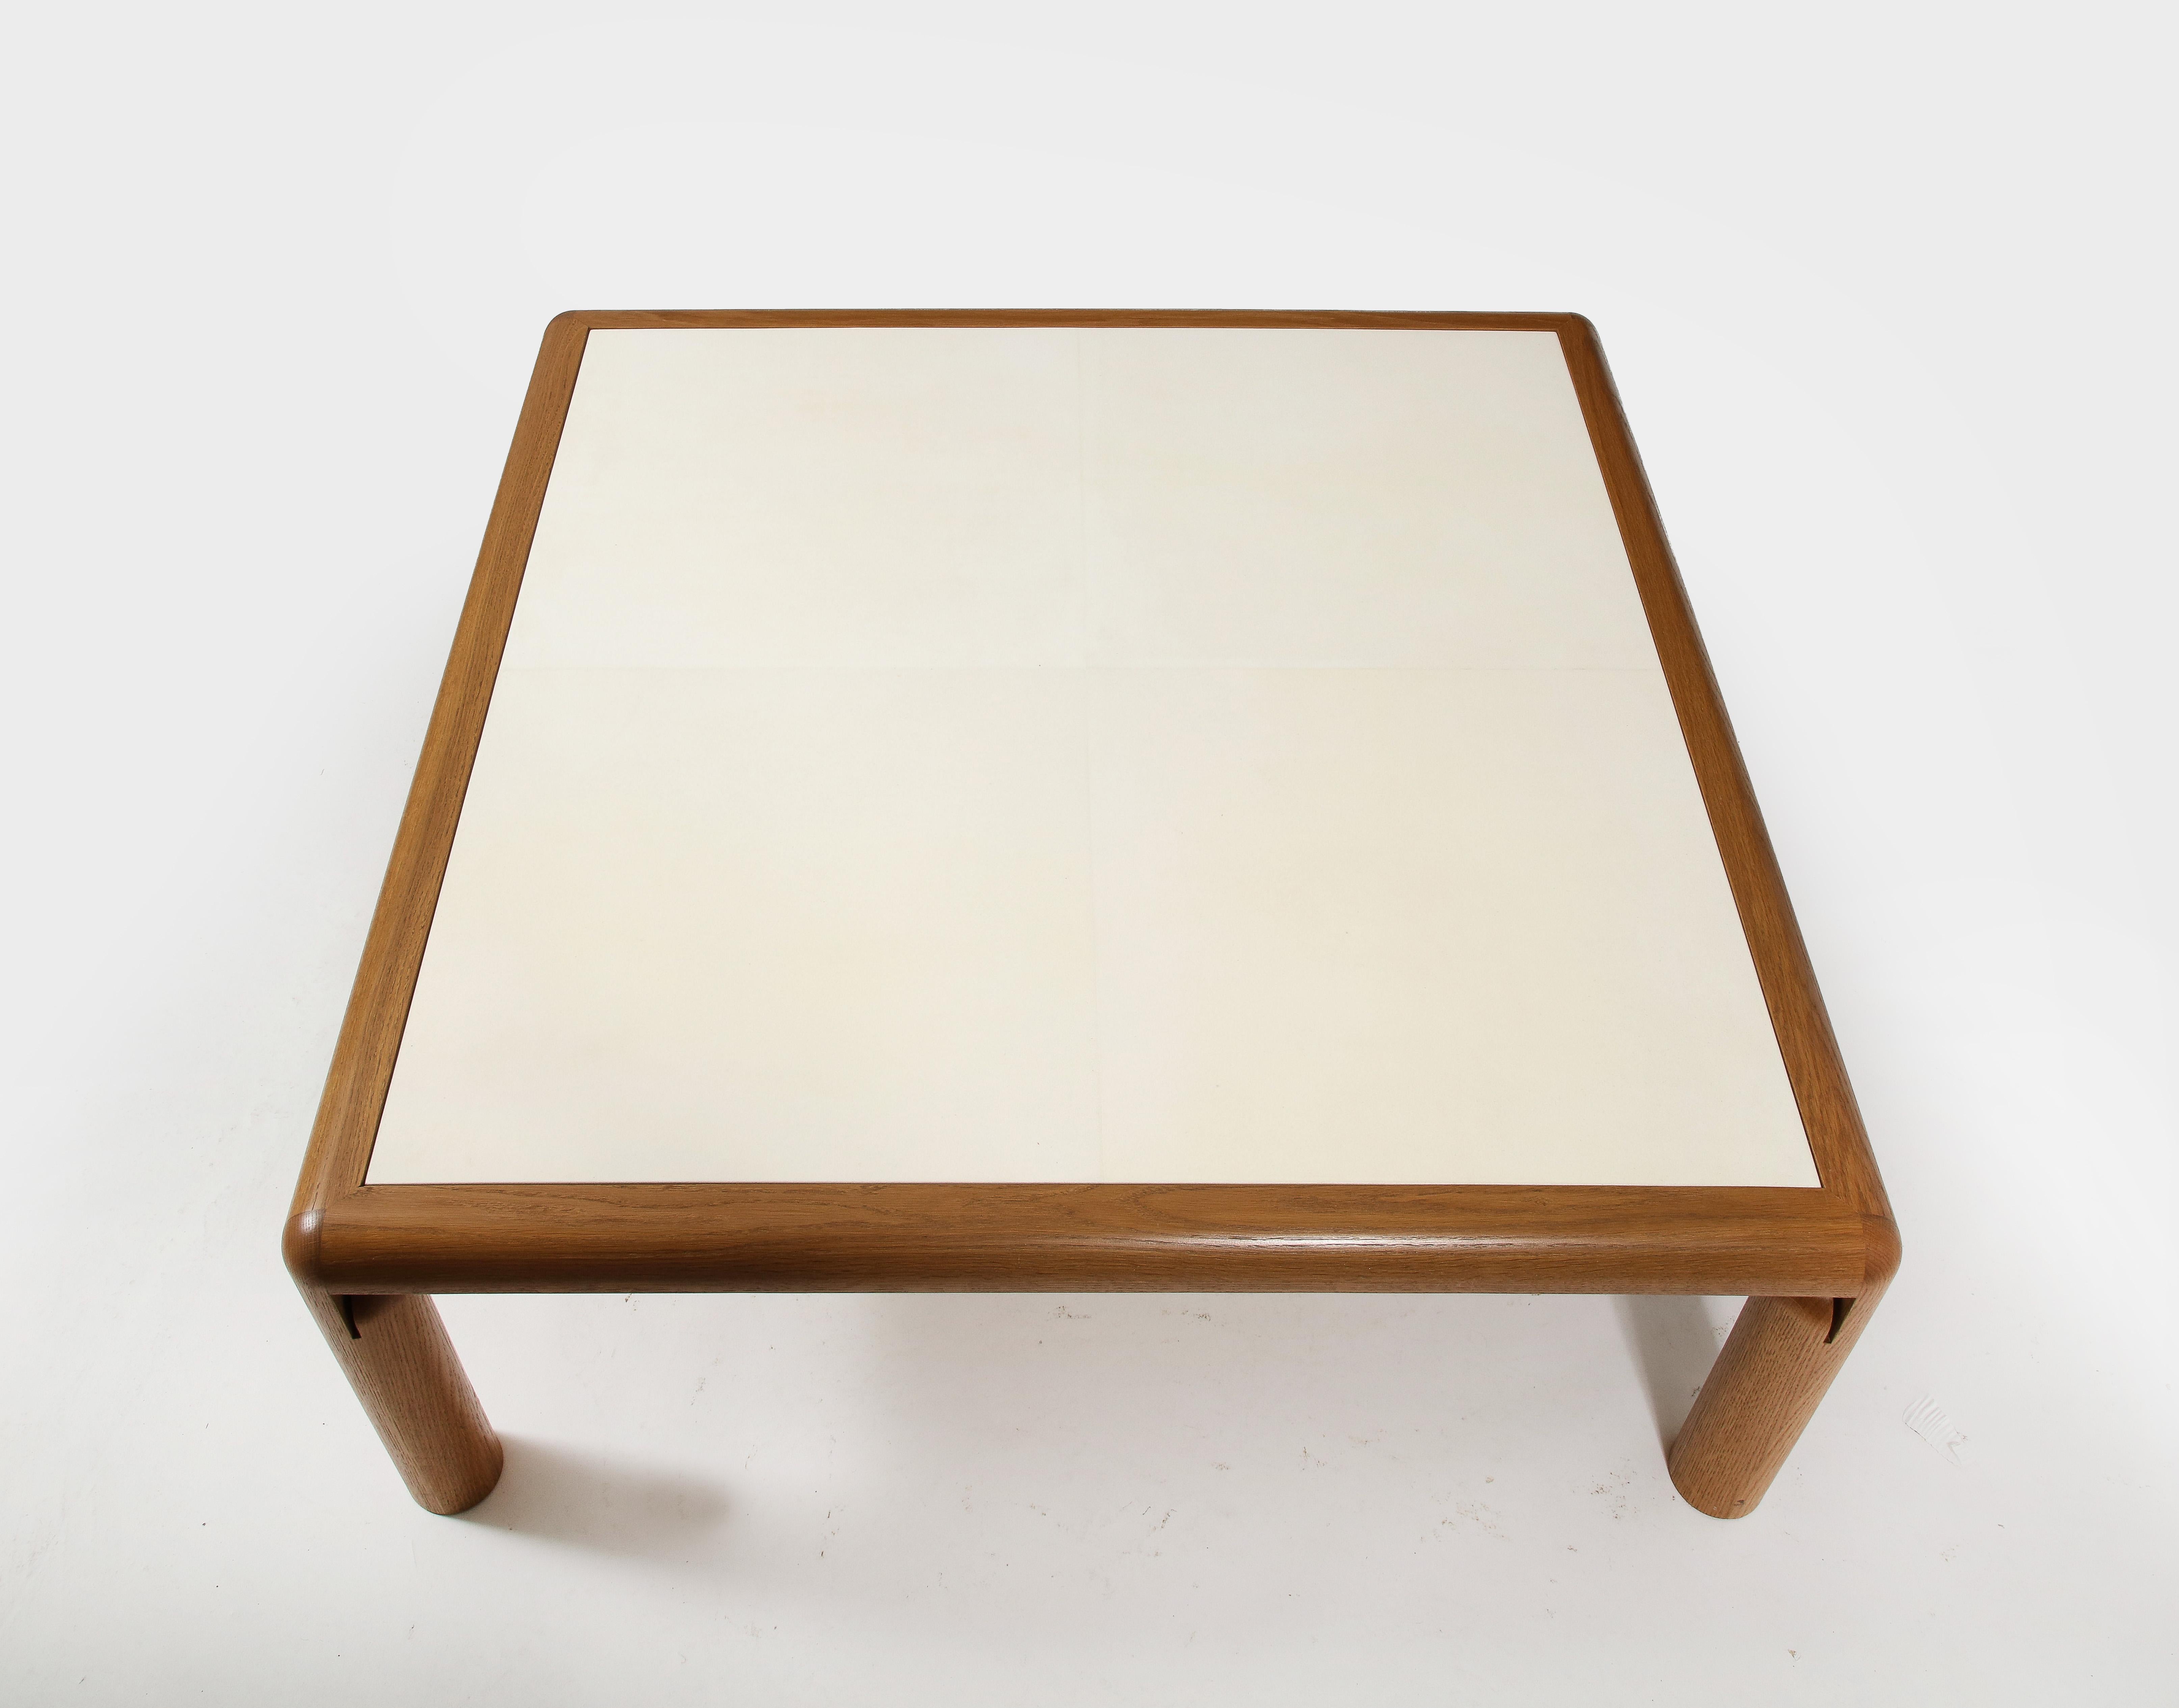 Solid Oak & Parchment Square Coffee Table in Early Modern & Mid-Century Style For Sale 7